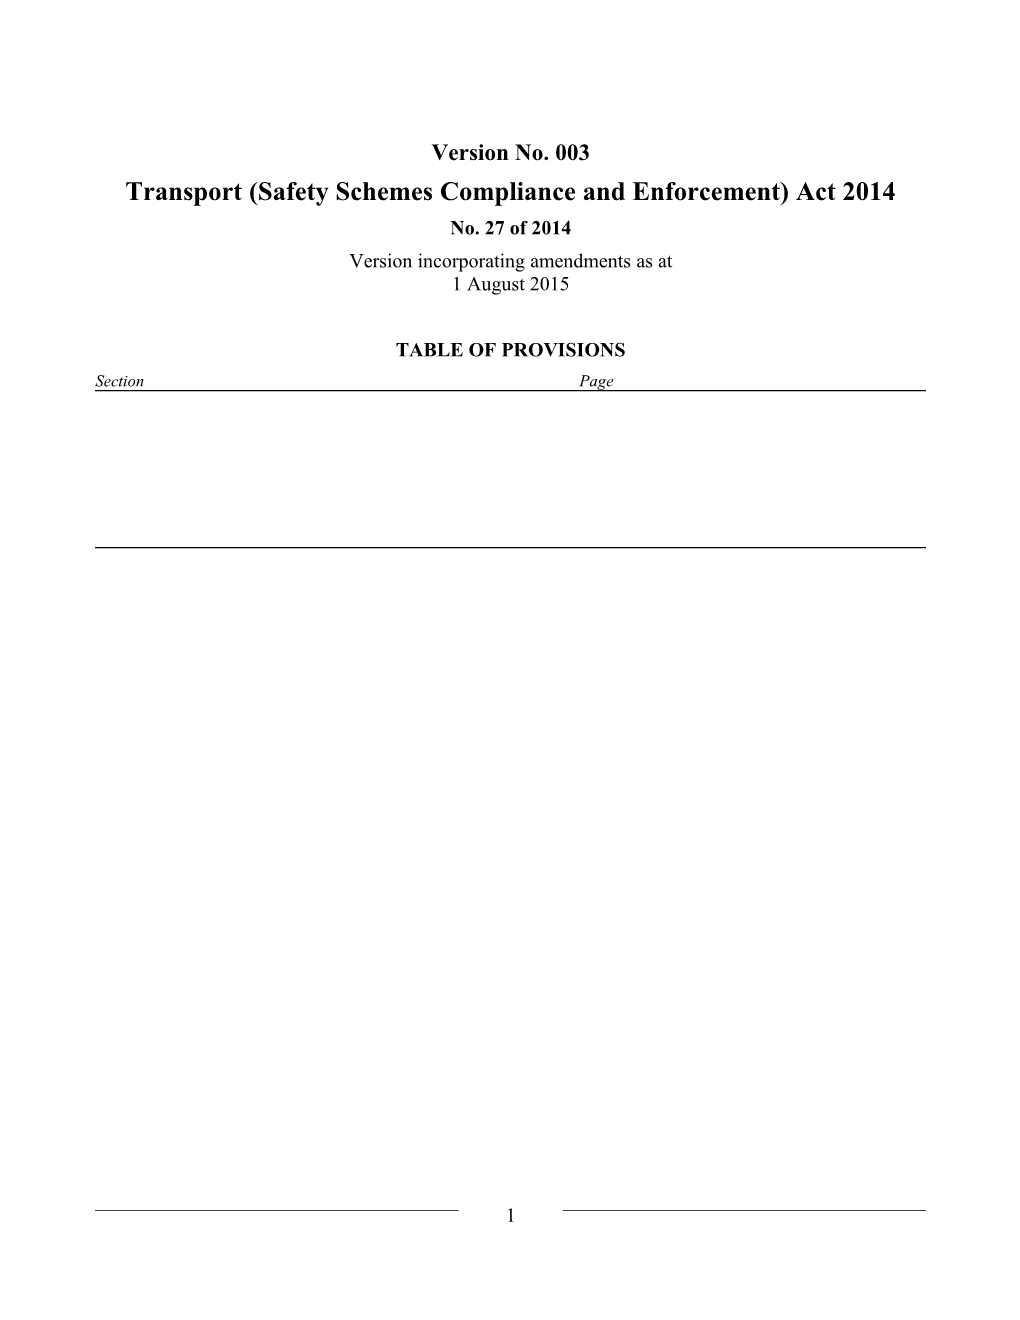 Transport (Safety Schemes Compliance and Enforcement) Act 2014